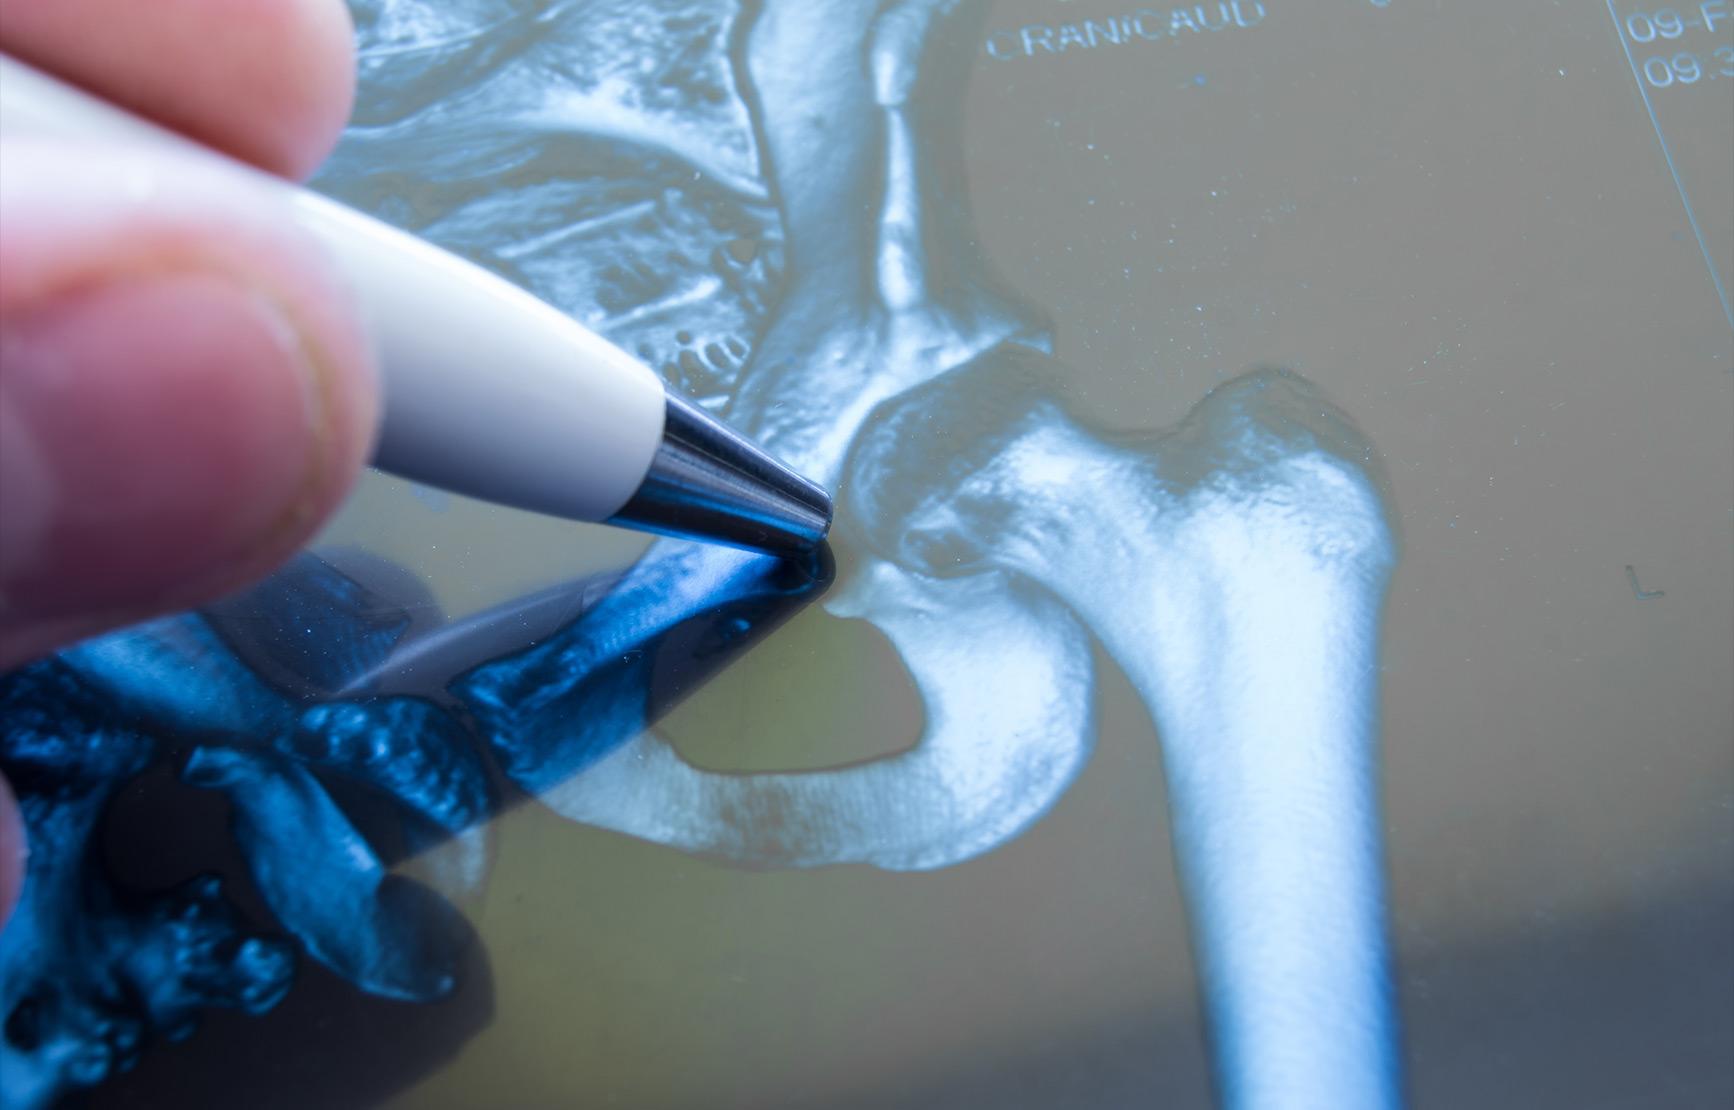 A hand pointing to a hip joint on an X-ray with a pen.